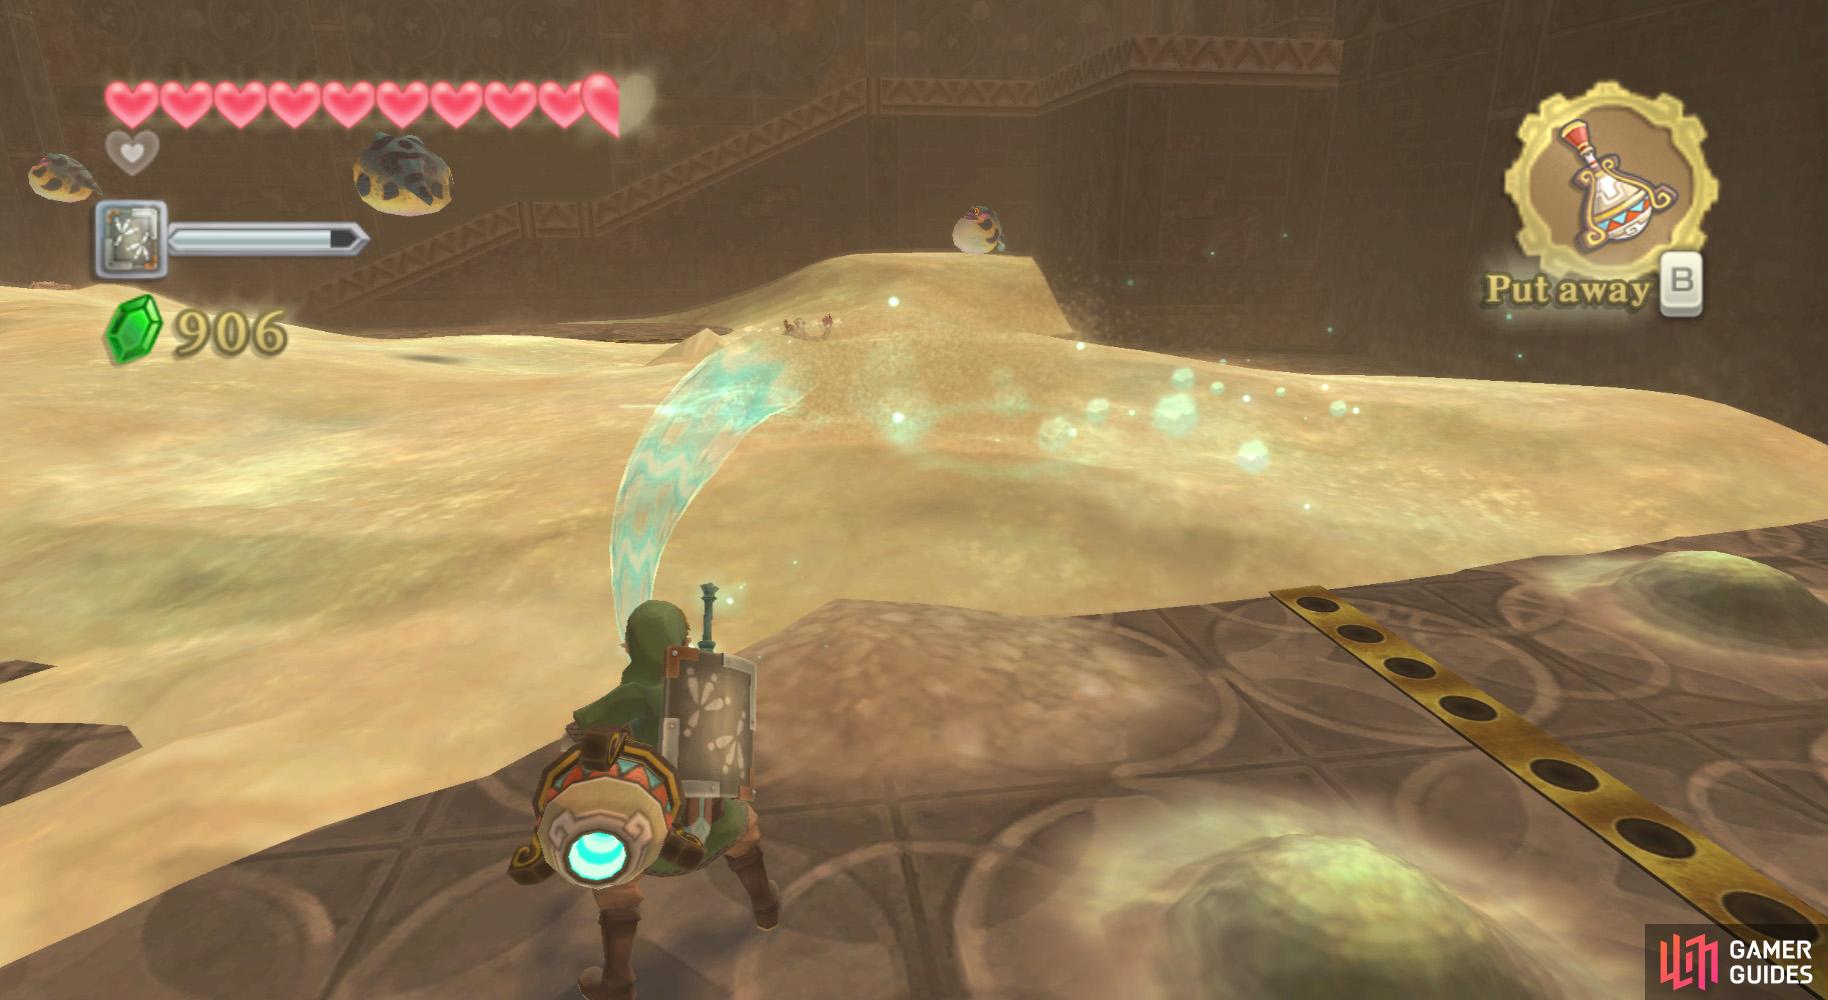 Here, Link can acquire the Gust Bellows.